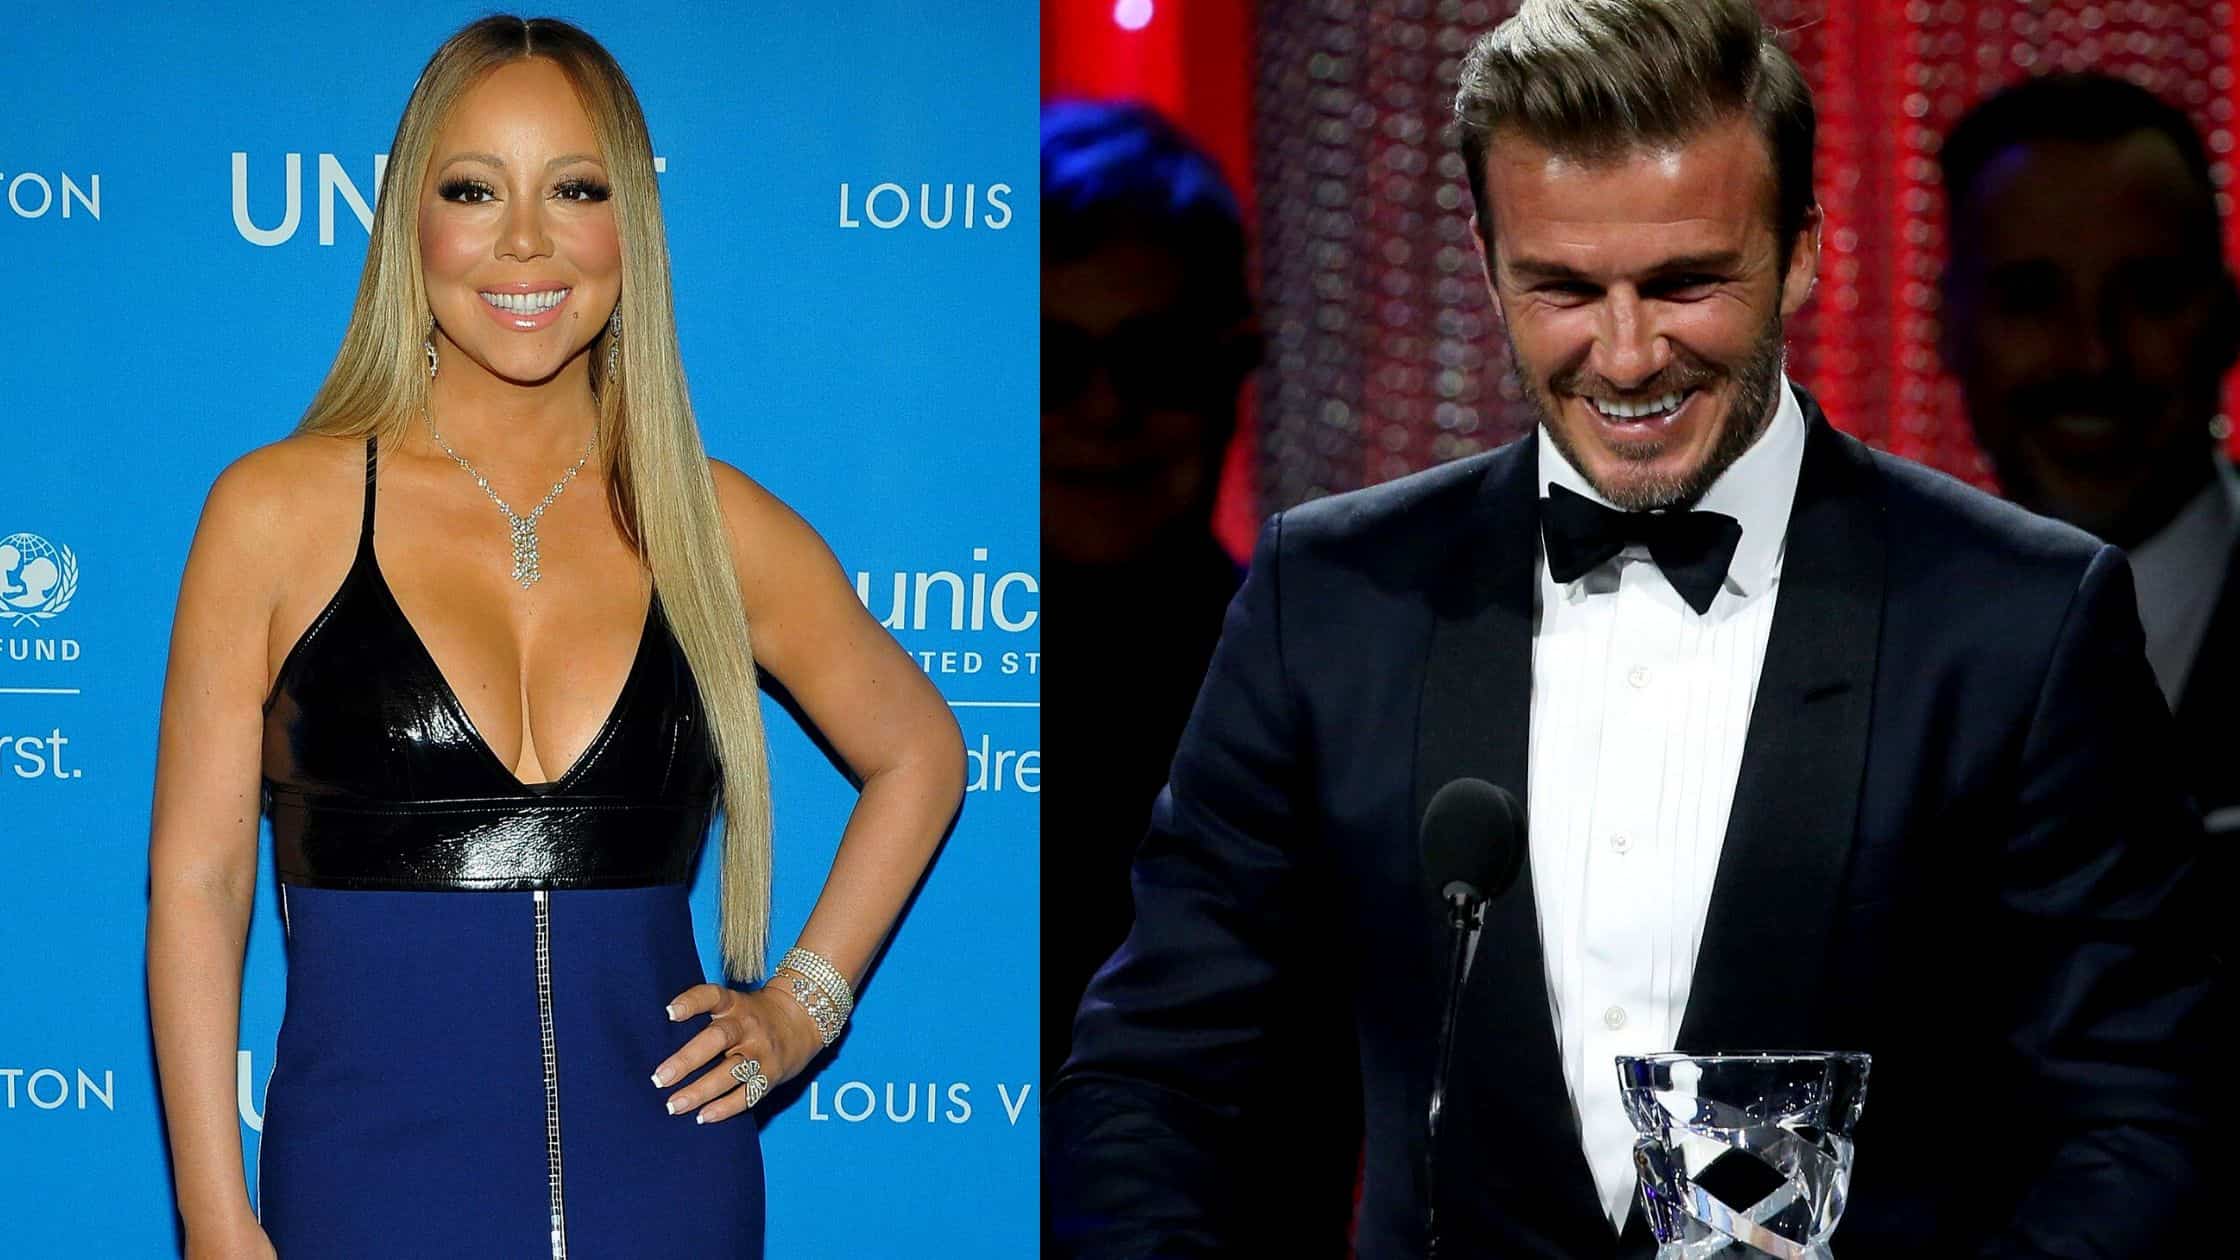 Mariah Carey Comments On David Beckham's Performance Of 'All I Want for Christmas Is You